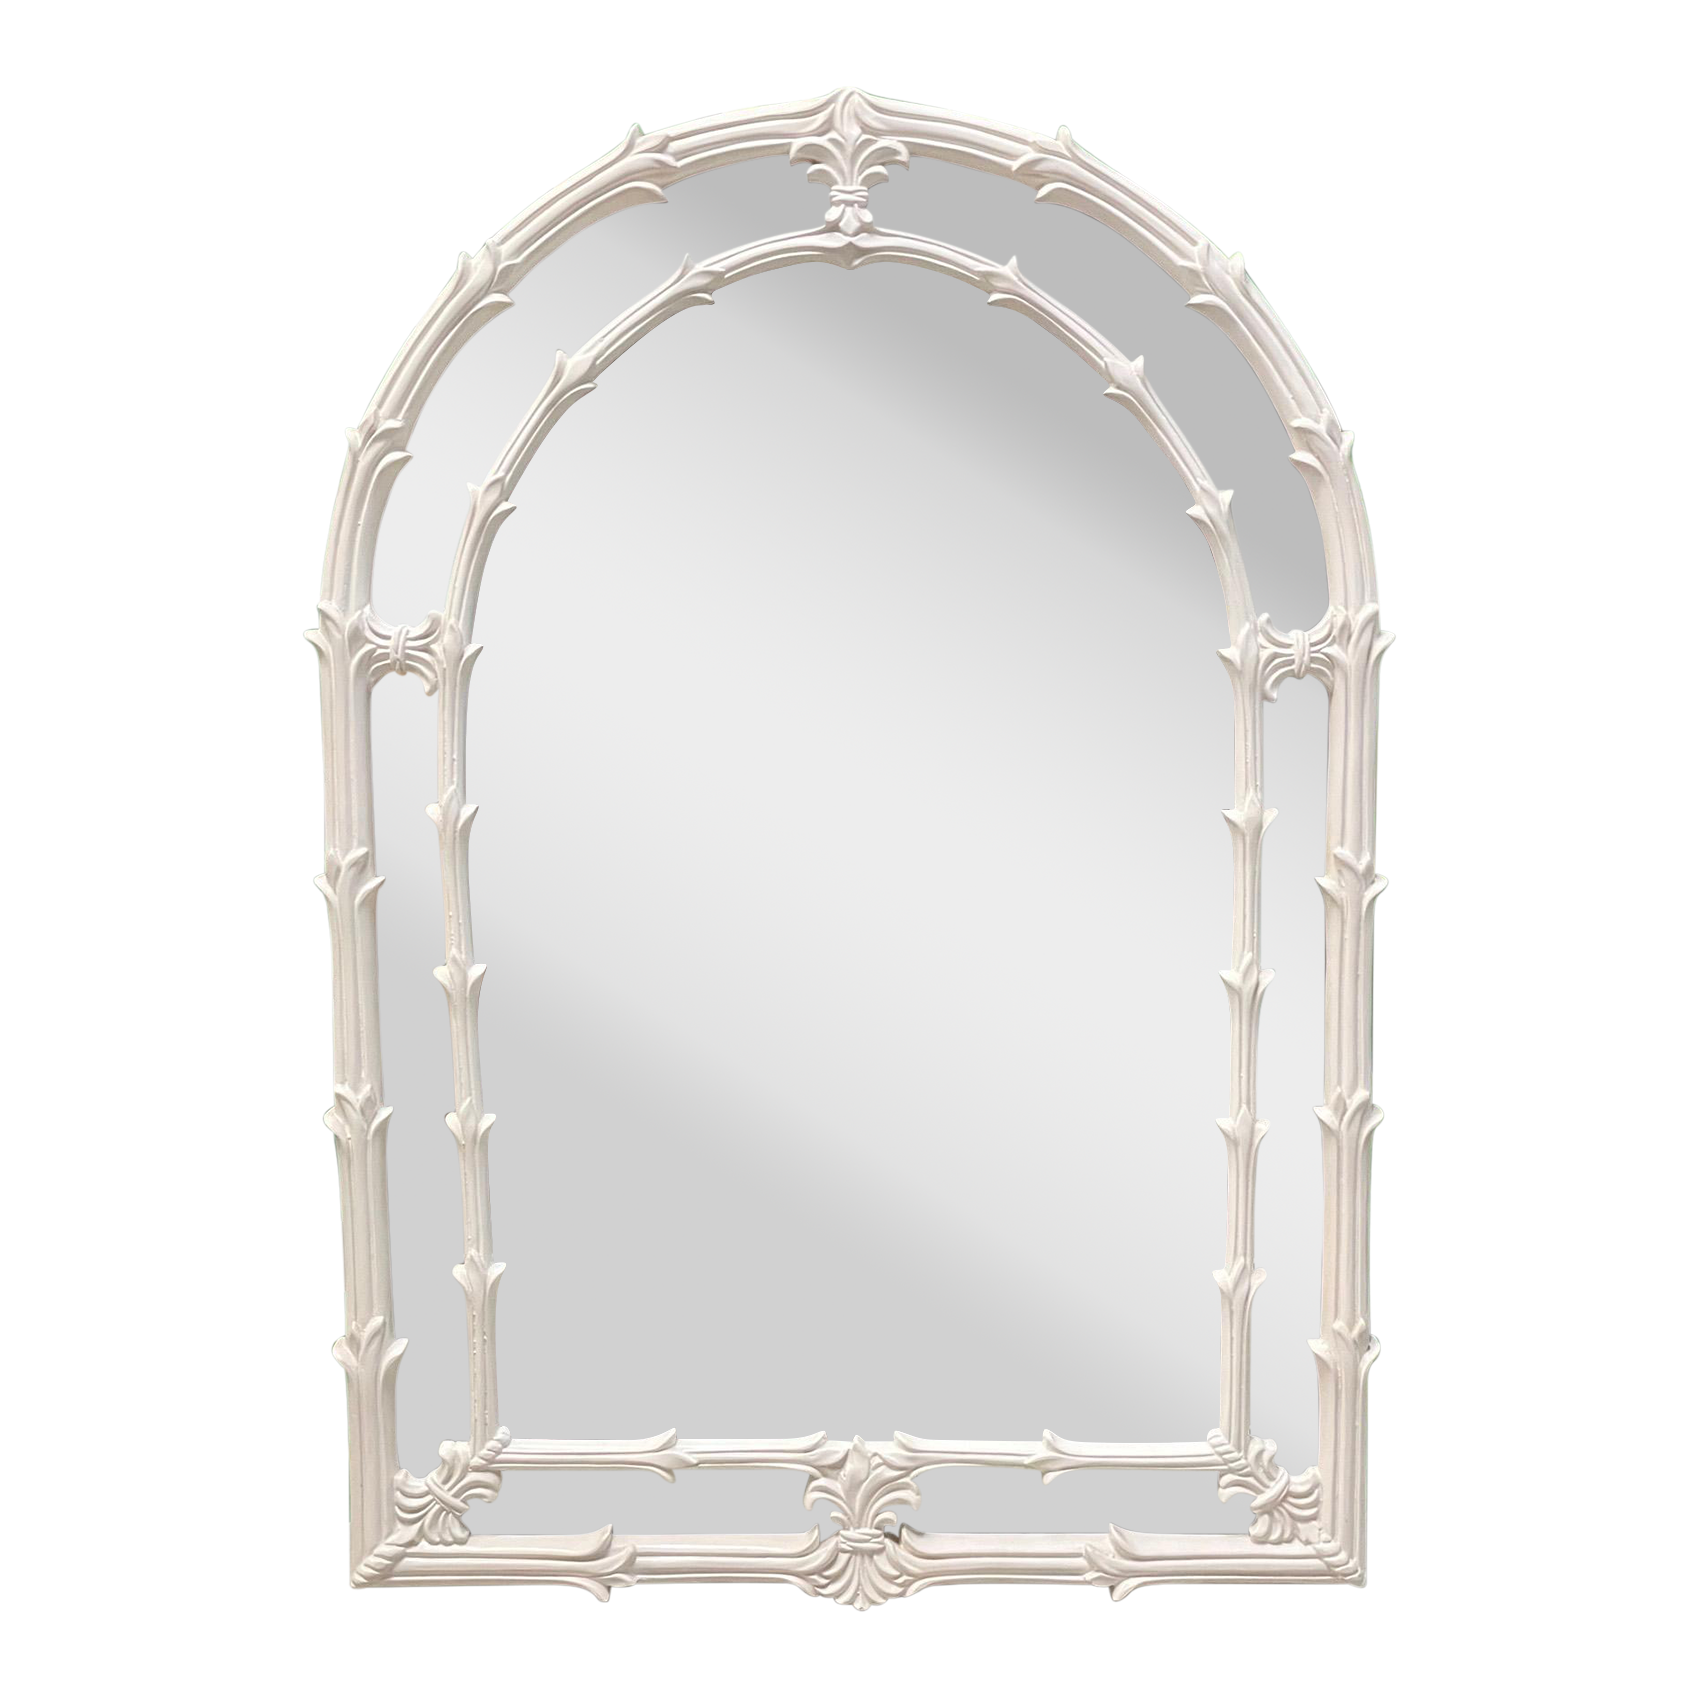 1970s Gampel Stoll Serge Roche Style Wall Mirror